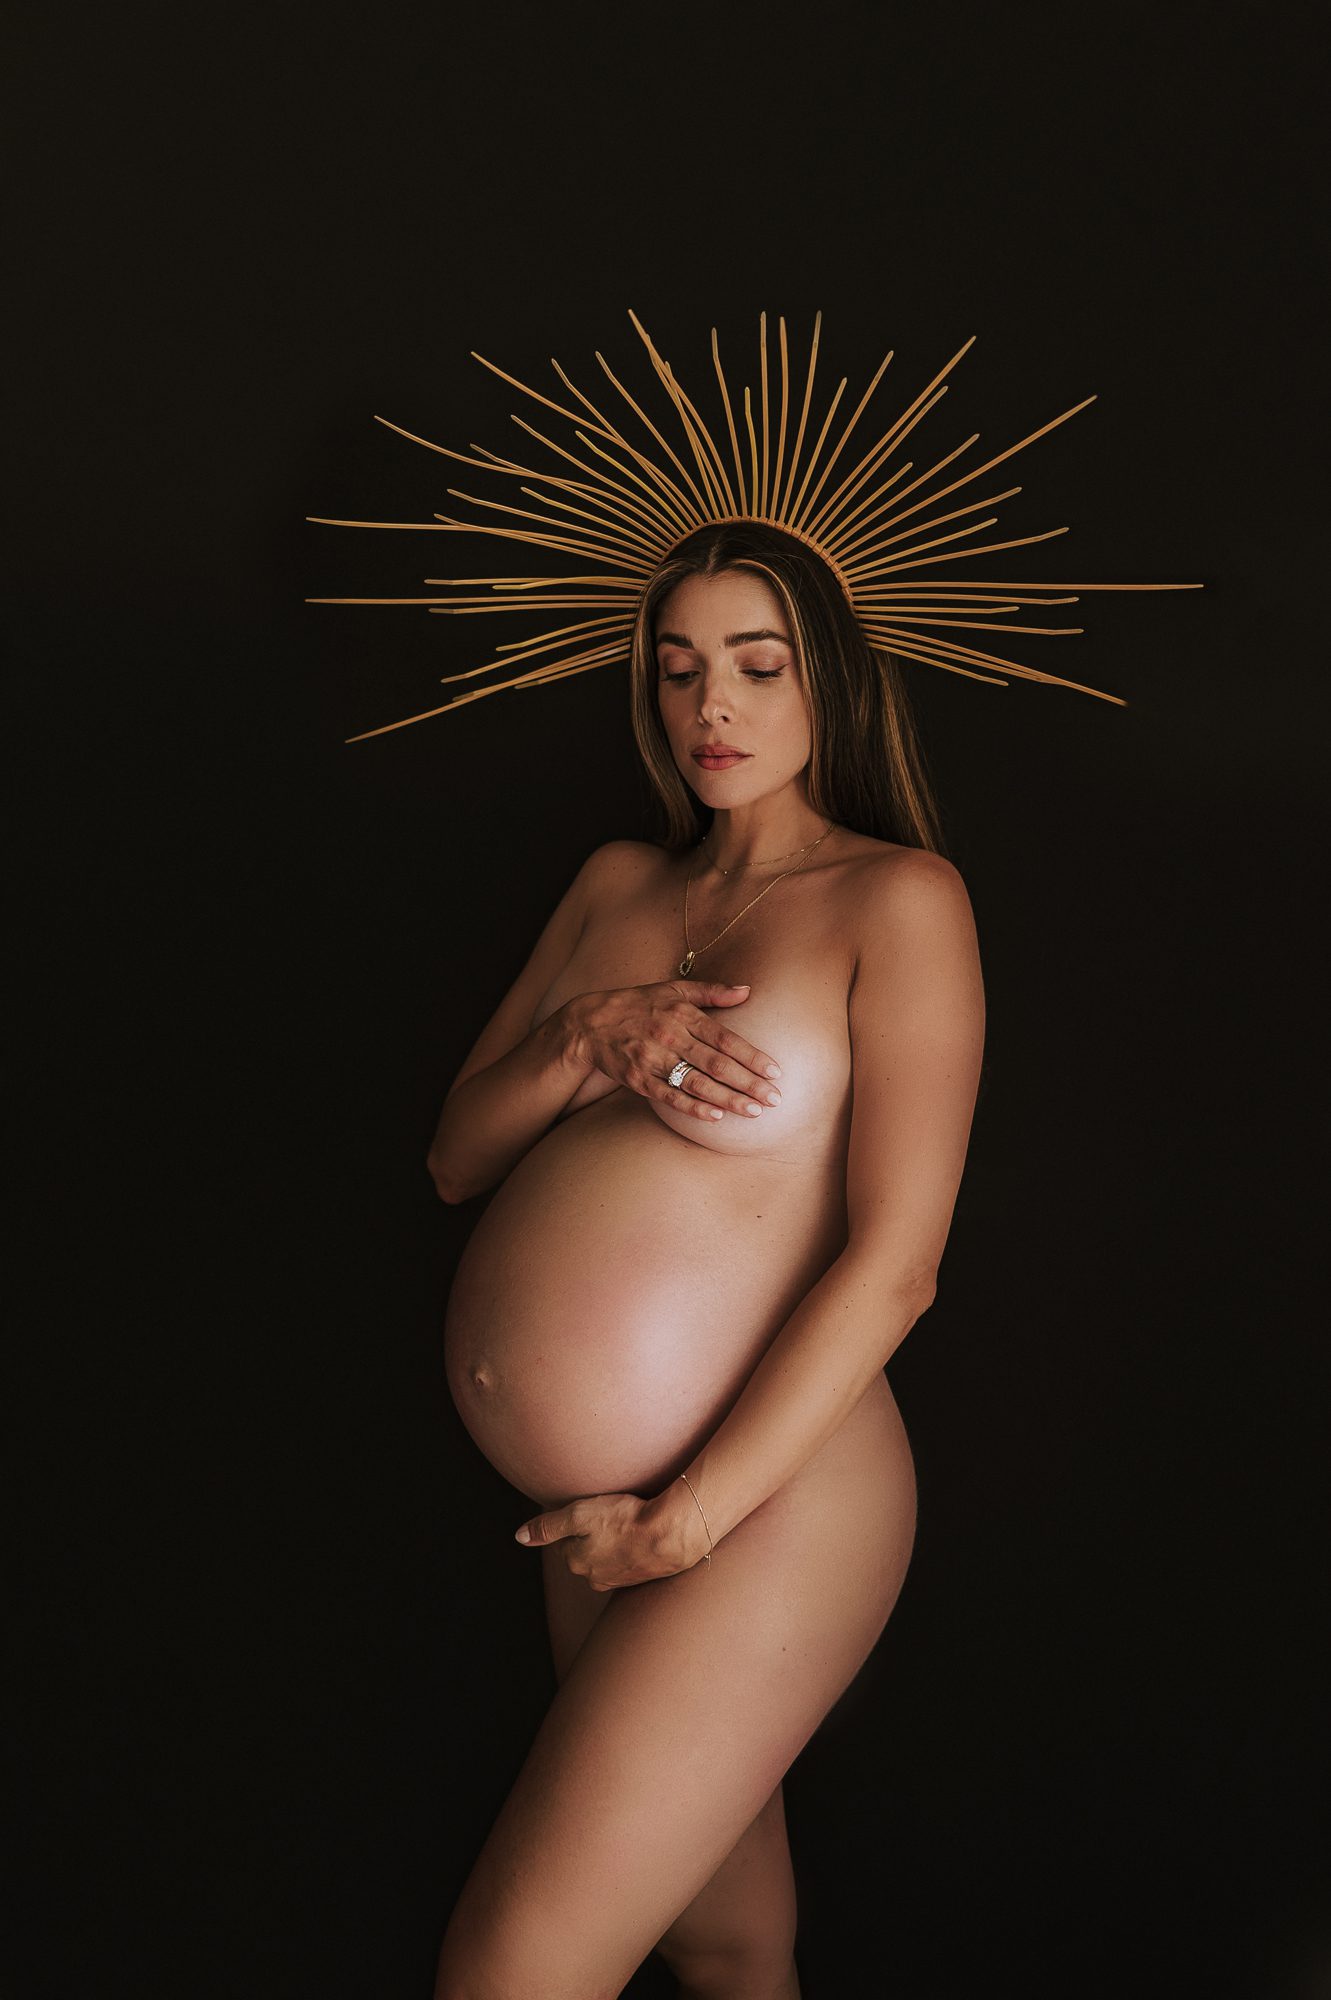 beautiful mother to be poses with golden grown on her head in this maternity portrait